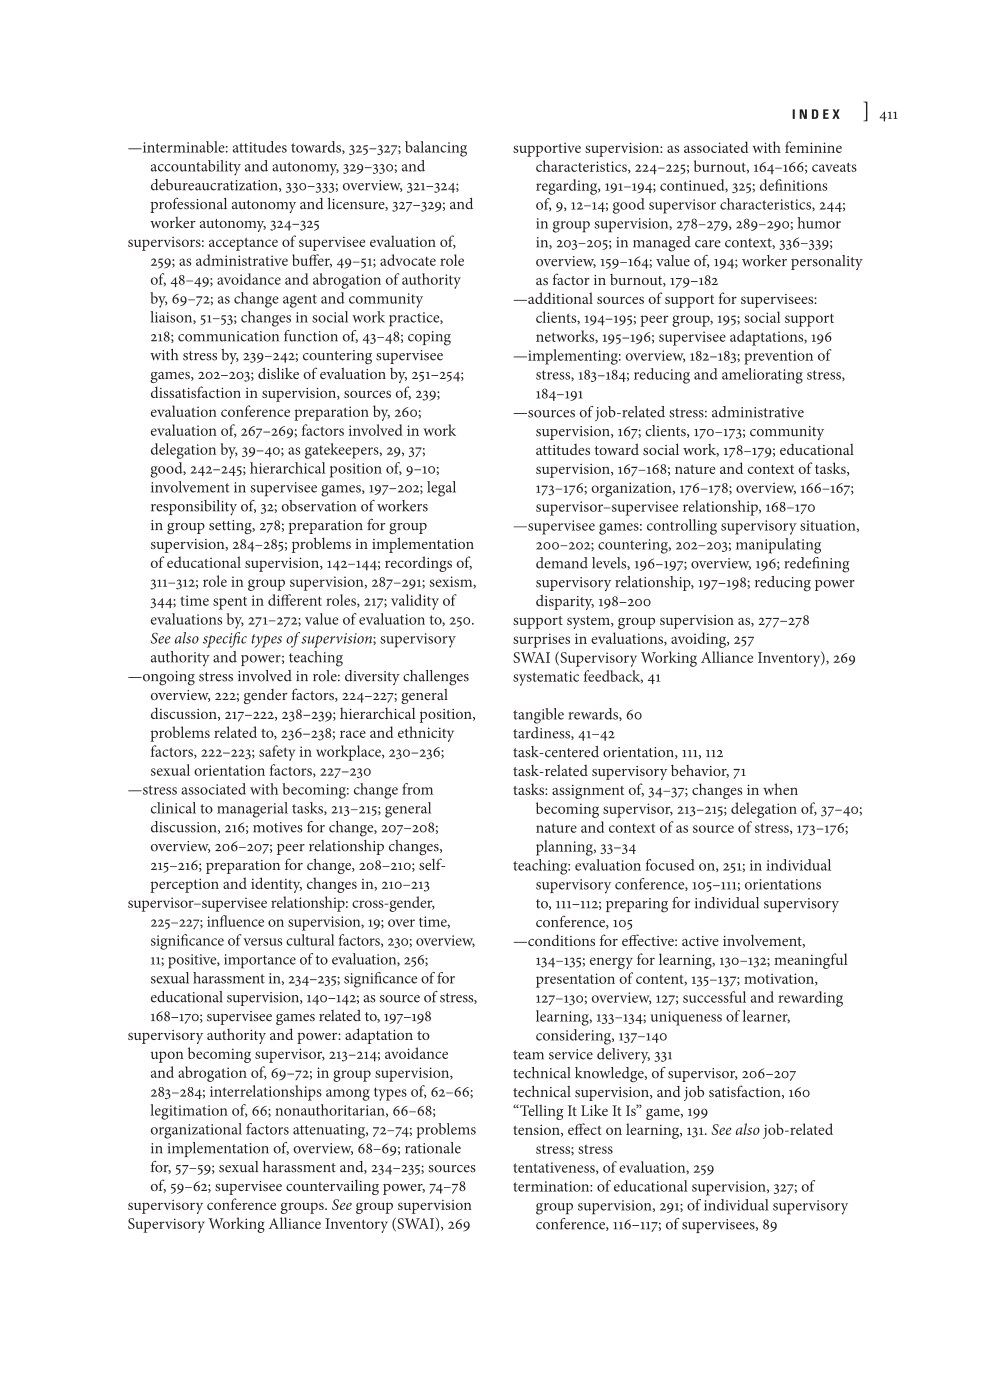 Supervision in Social Work, Fifth Edition page 411